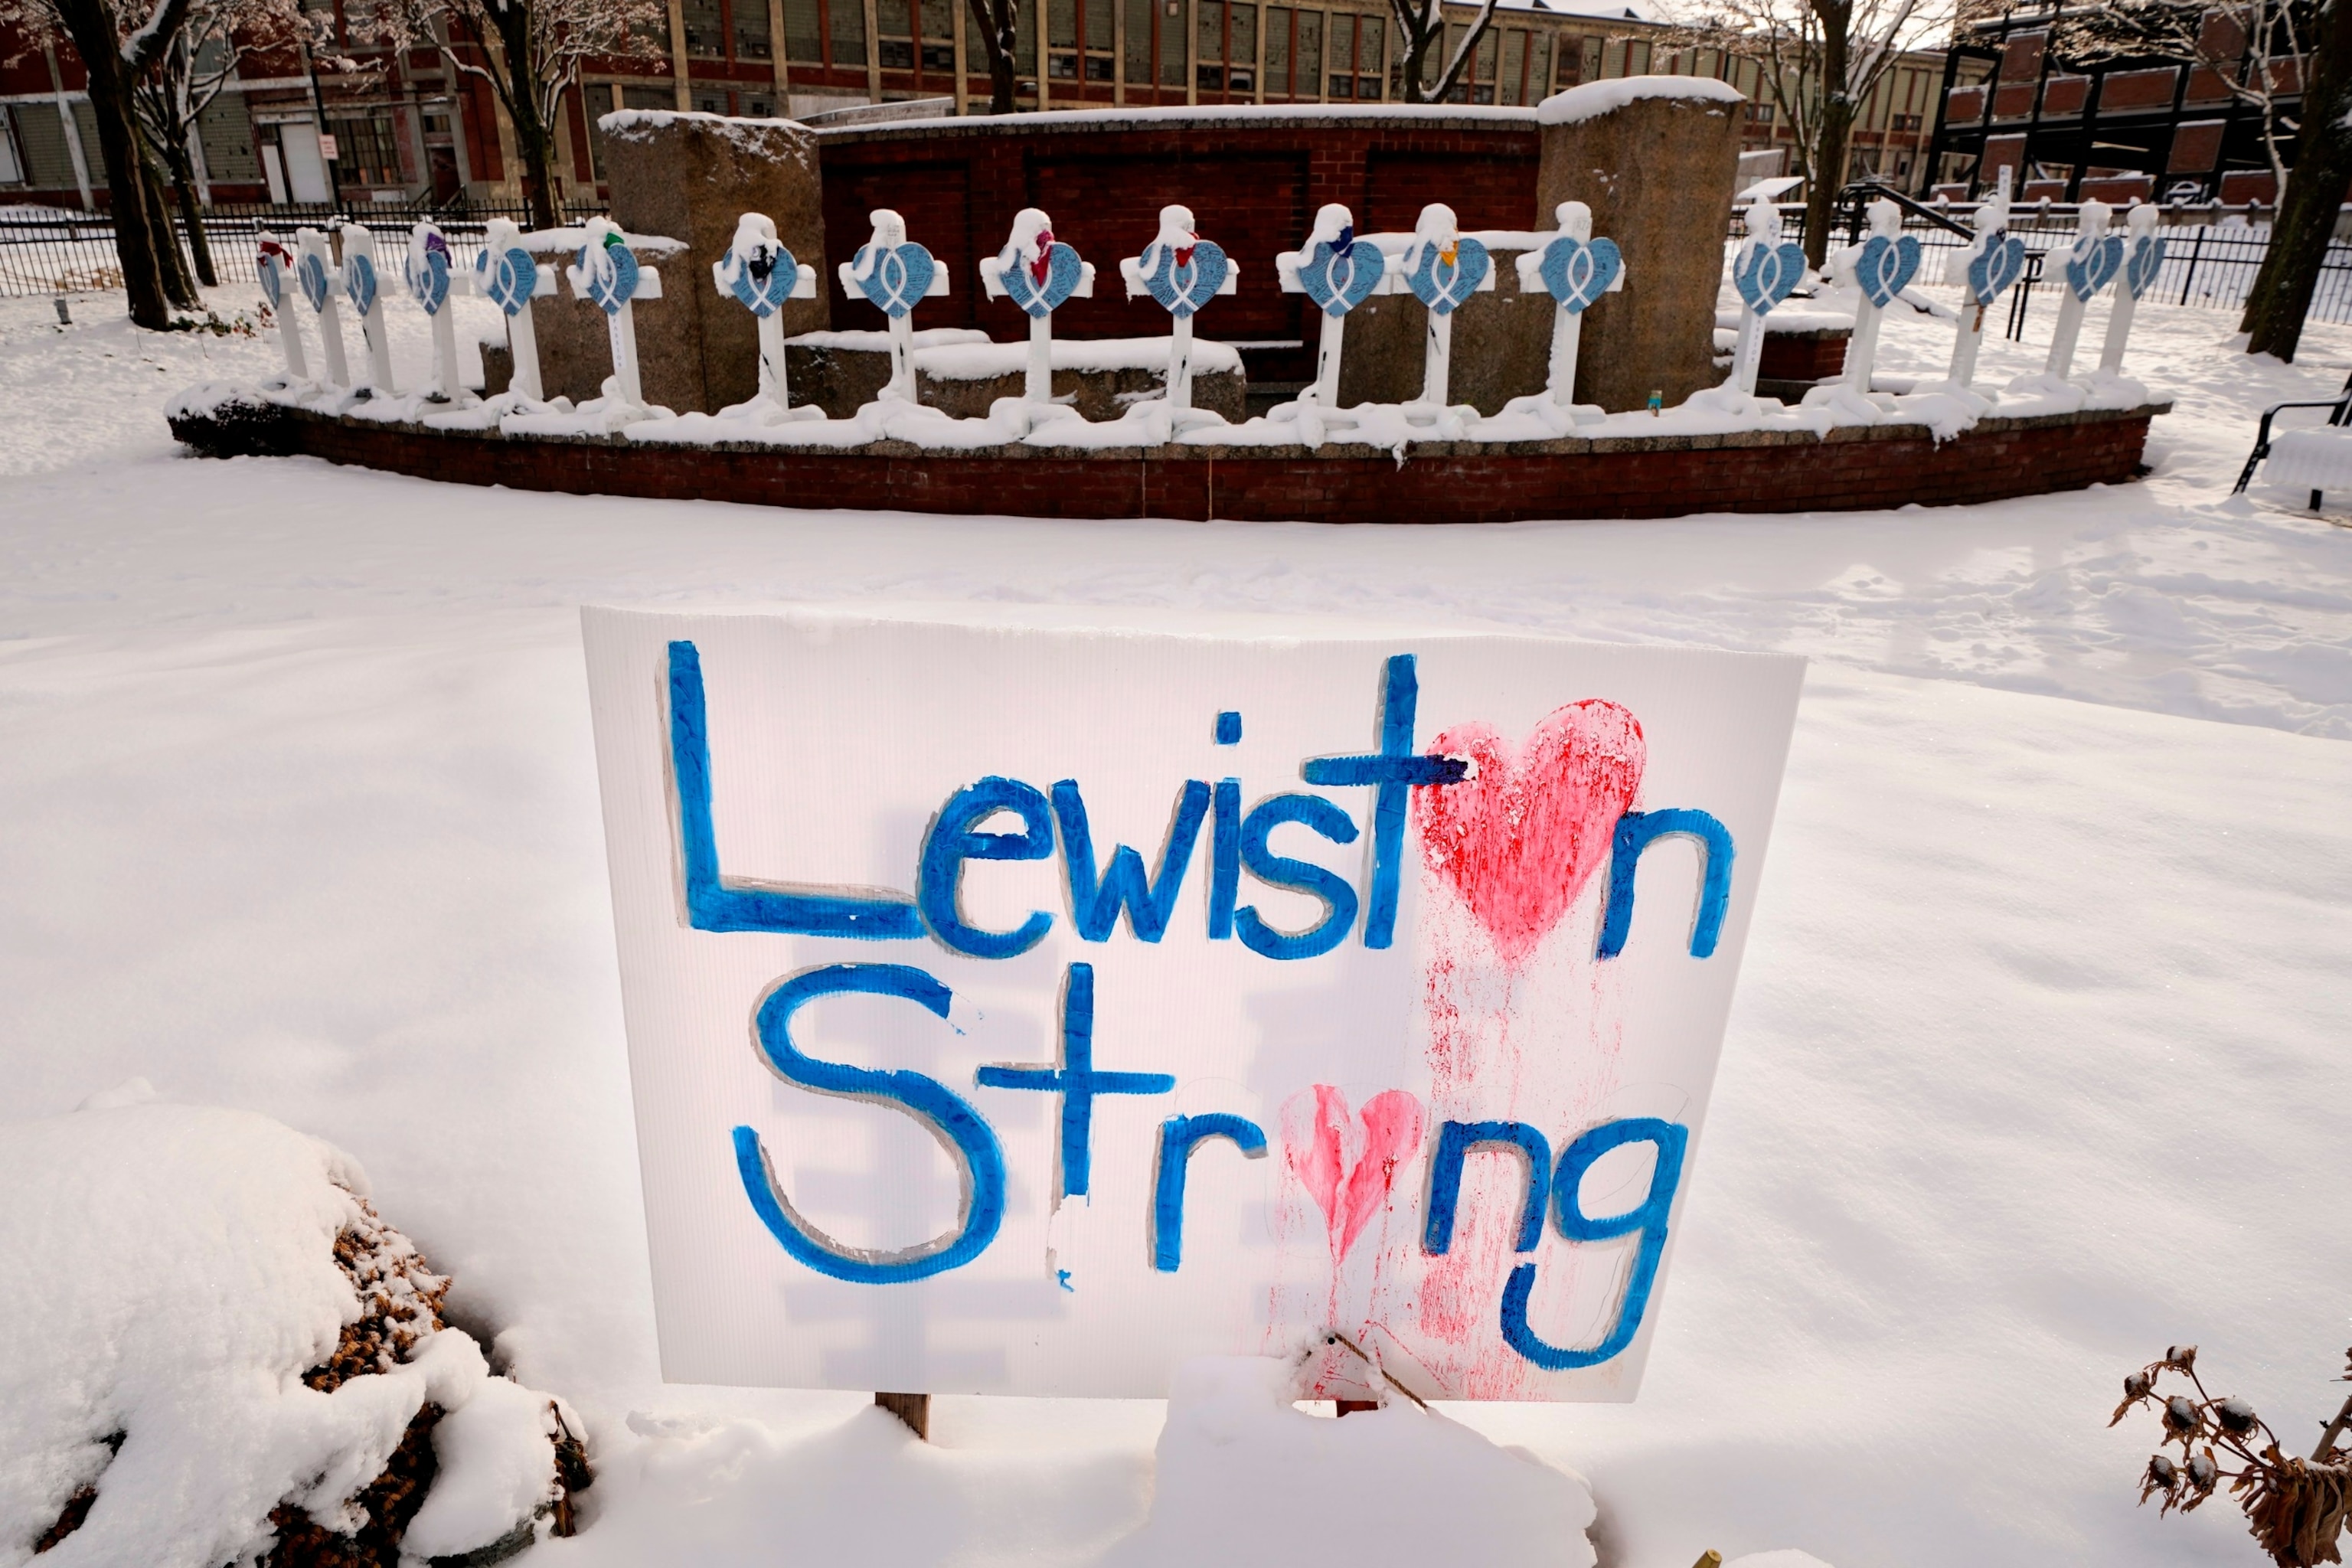 Recent snowfall coats crosses at one of several memorials for the victims of the Oct. 25 mass shooting in Lewiston, Maine, on Tuesday, Dec. 5, 2023. (AP Photo/Robert F. Bukaty, File)